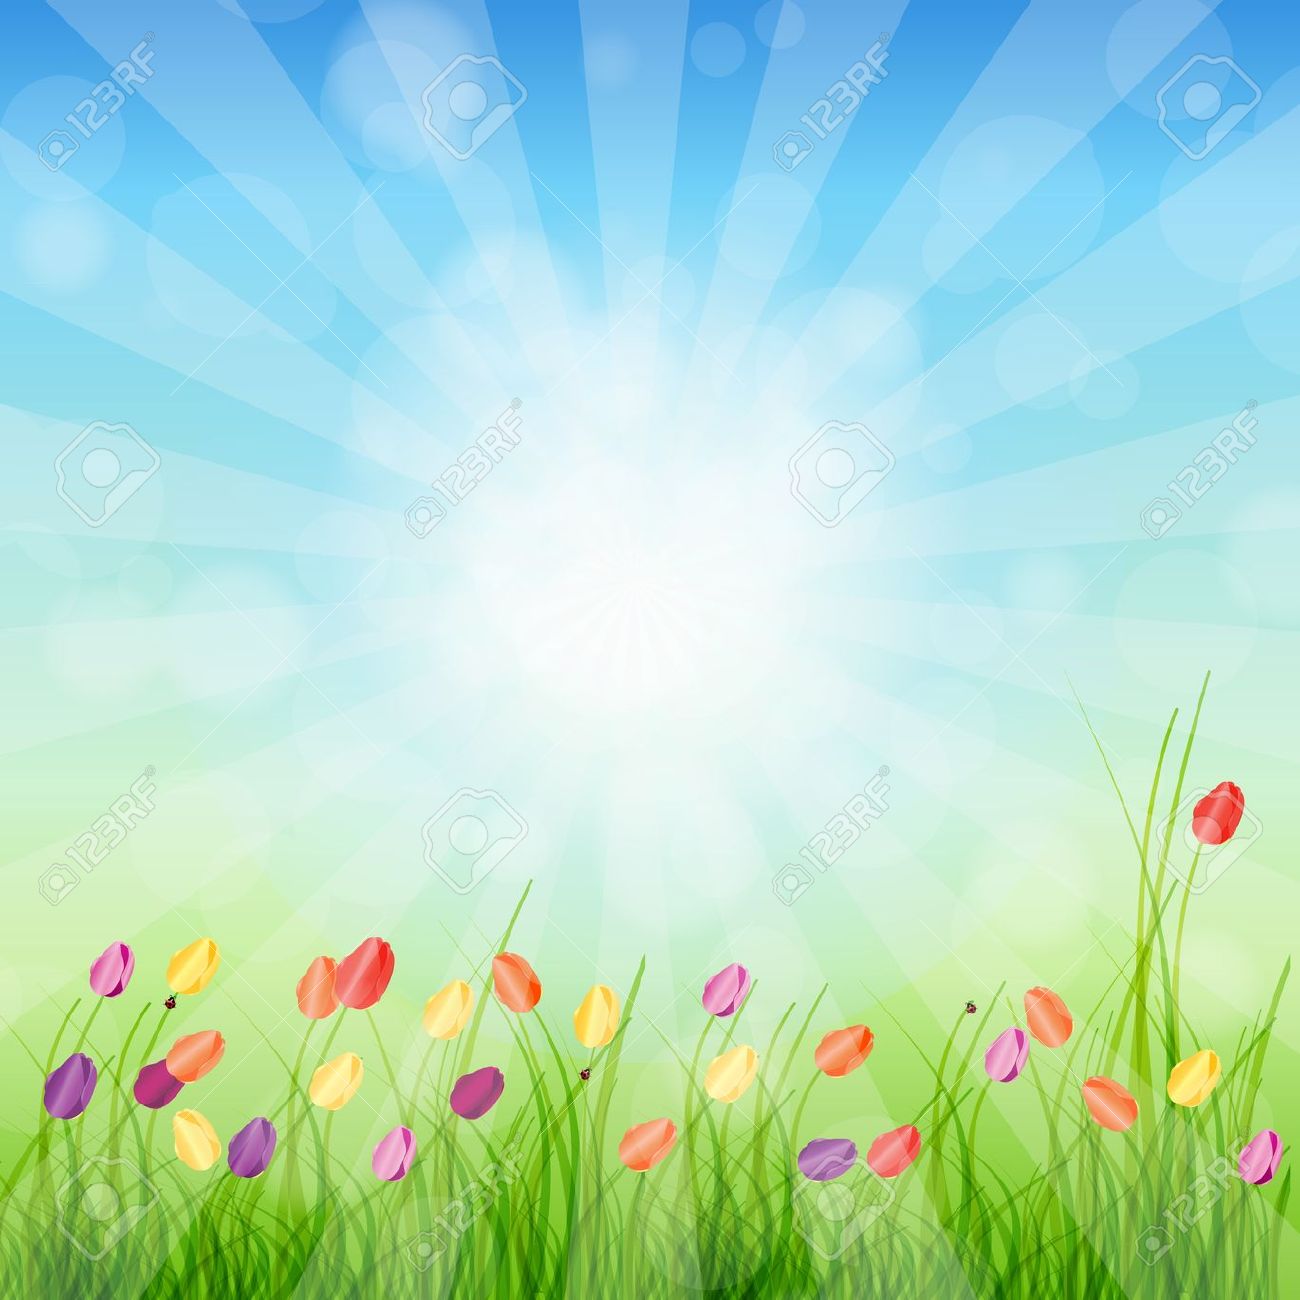 Spring background clipart - Clipground